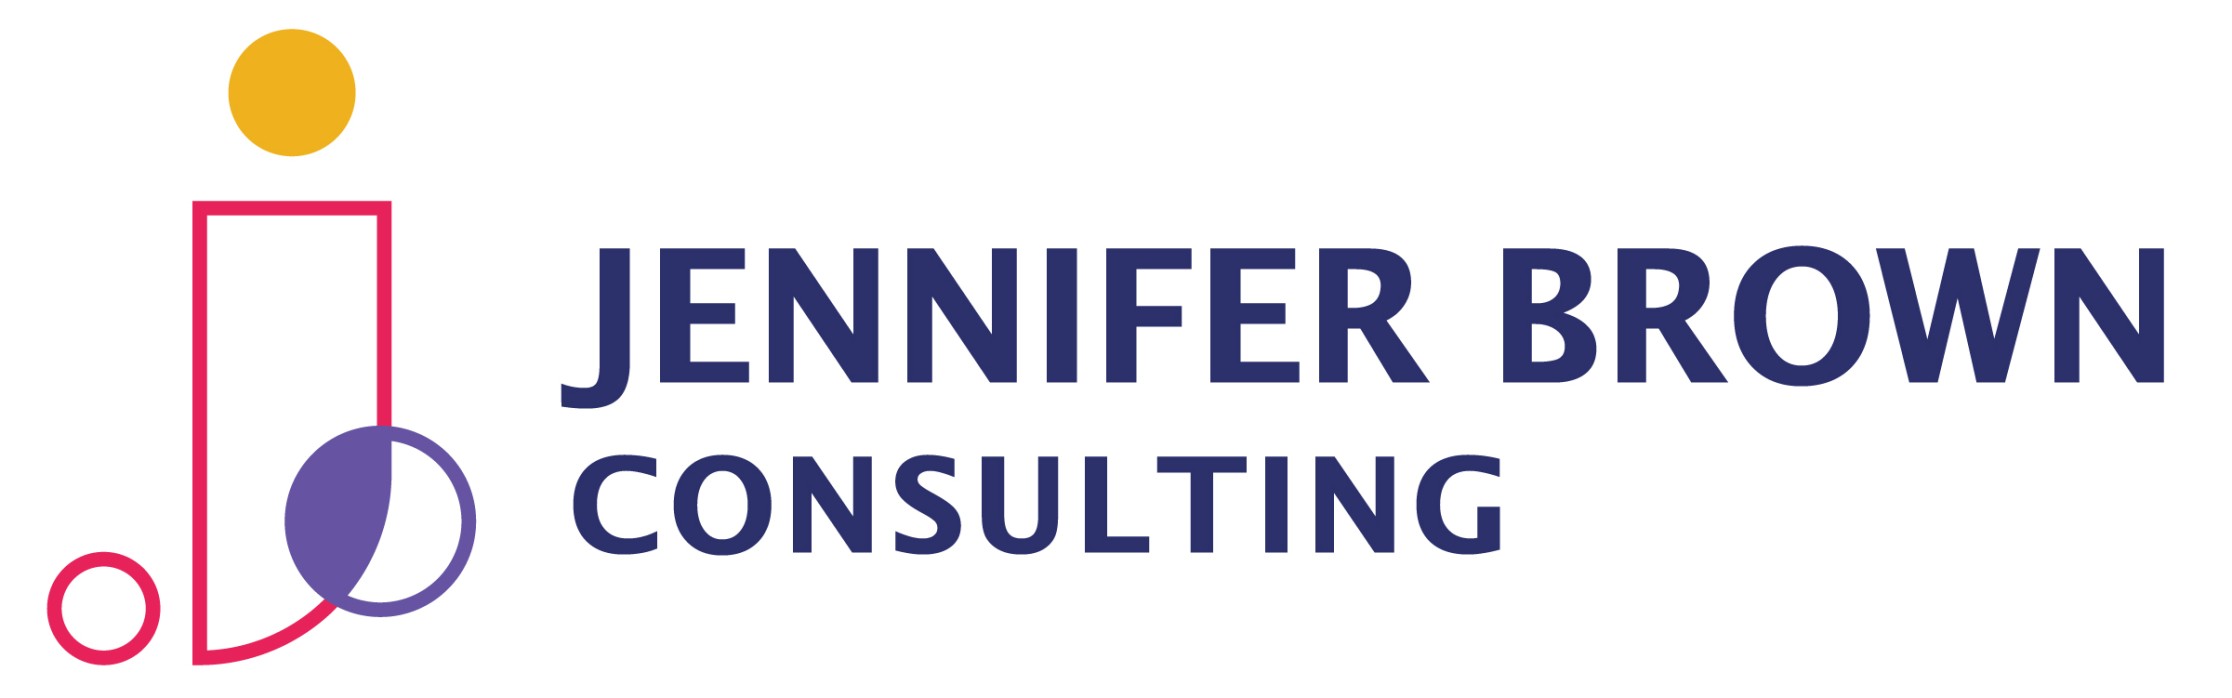 Jennifer Brown Consulting